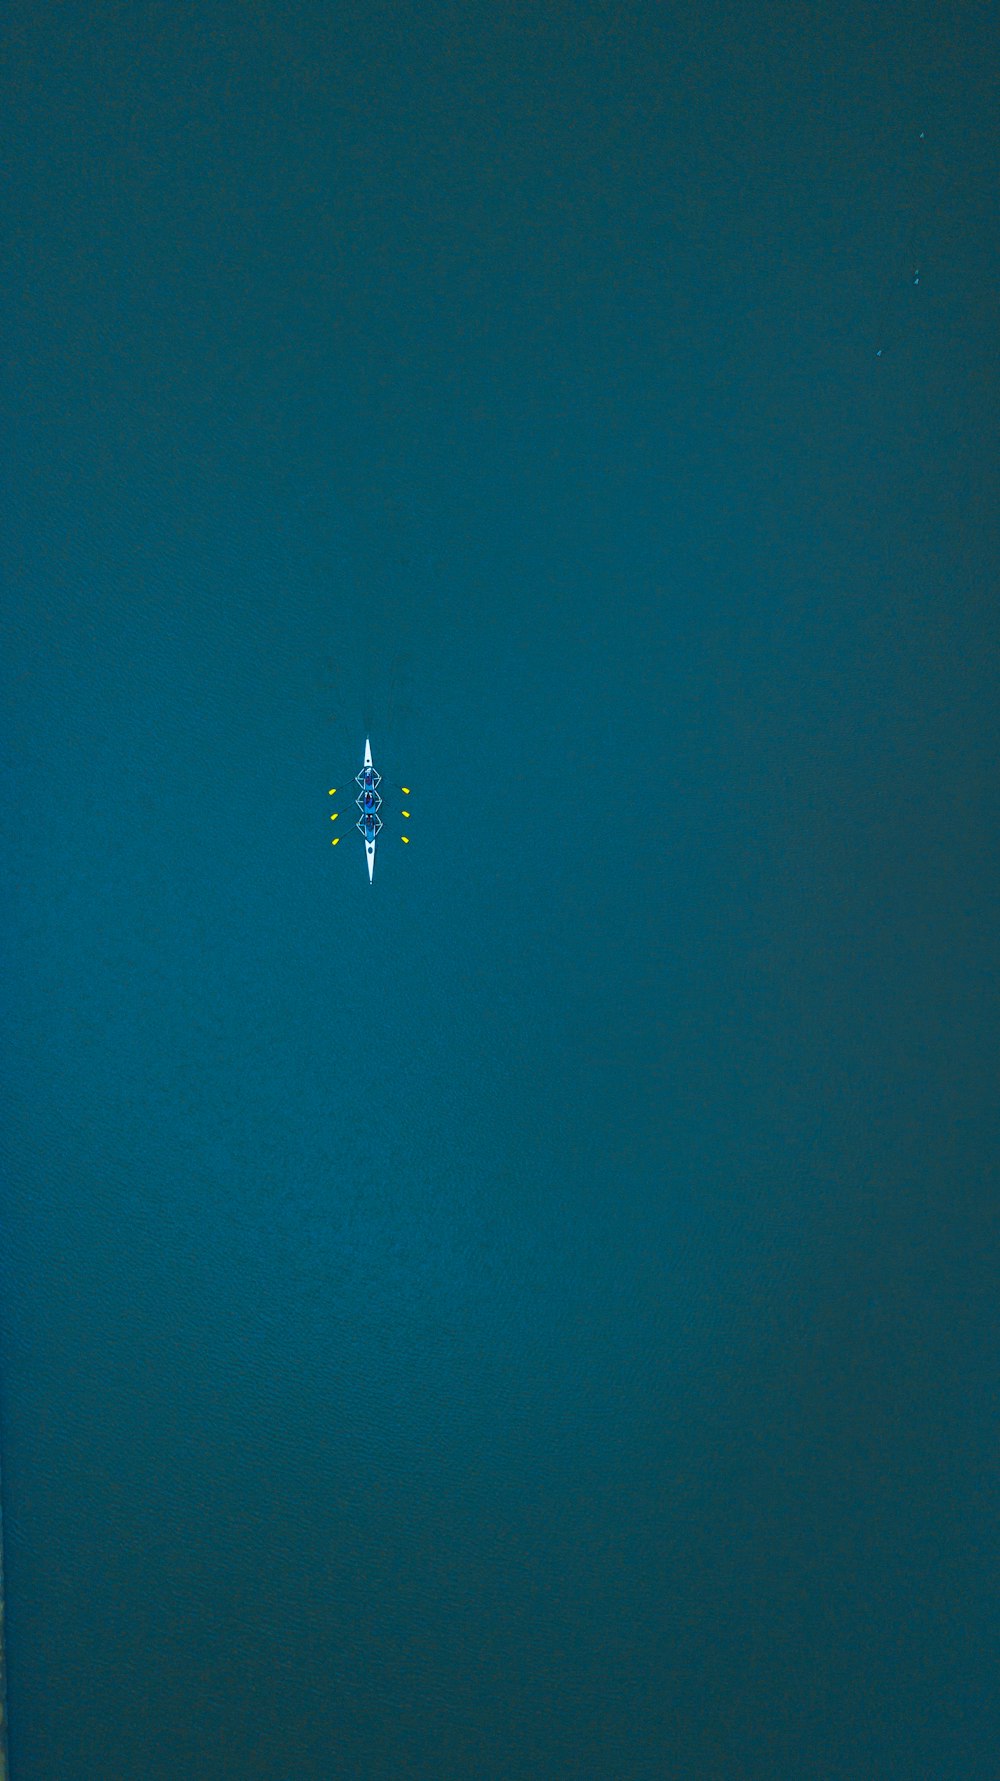 an aerial view of a person on a surfboard in the ocean